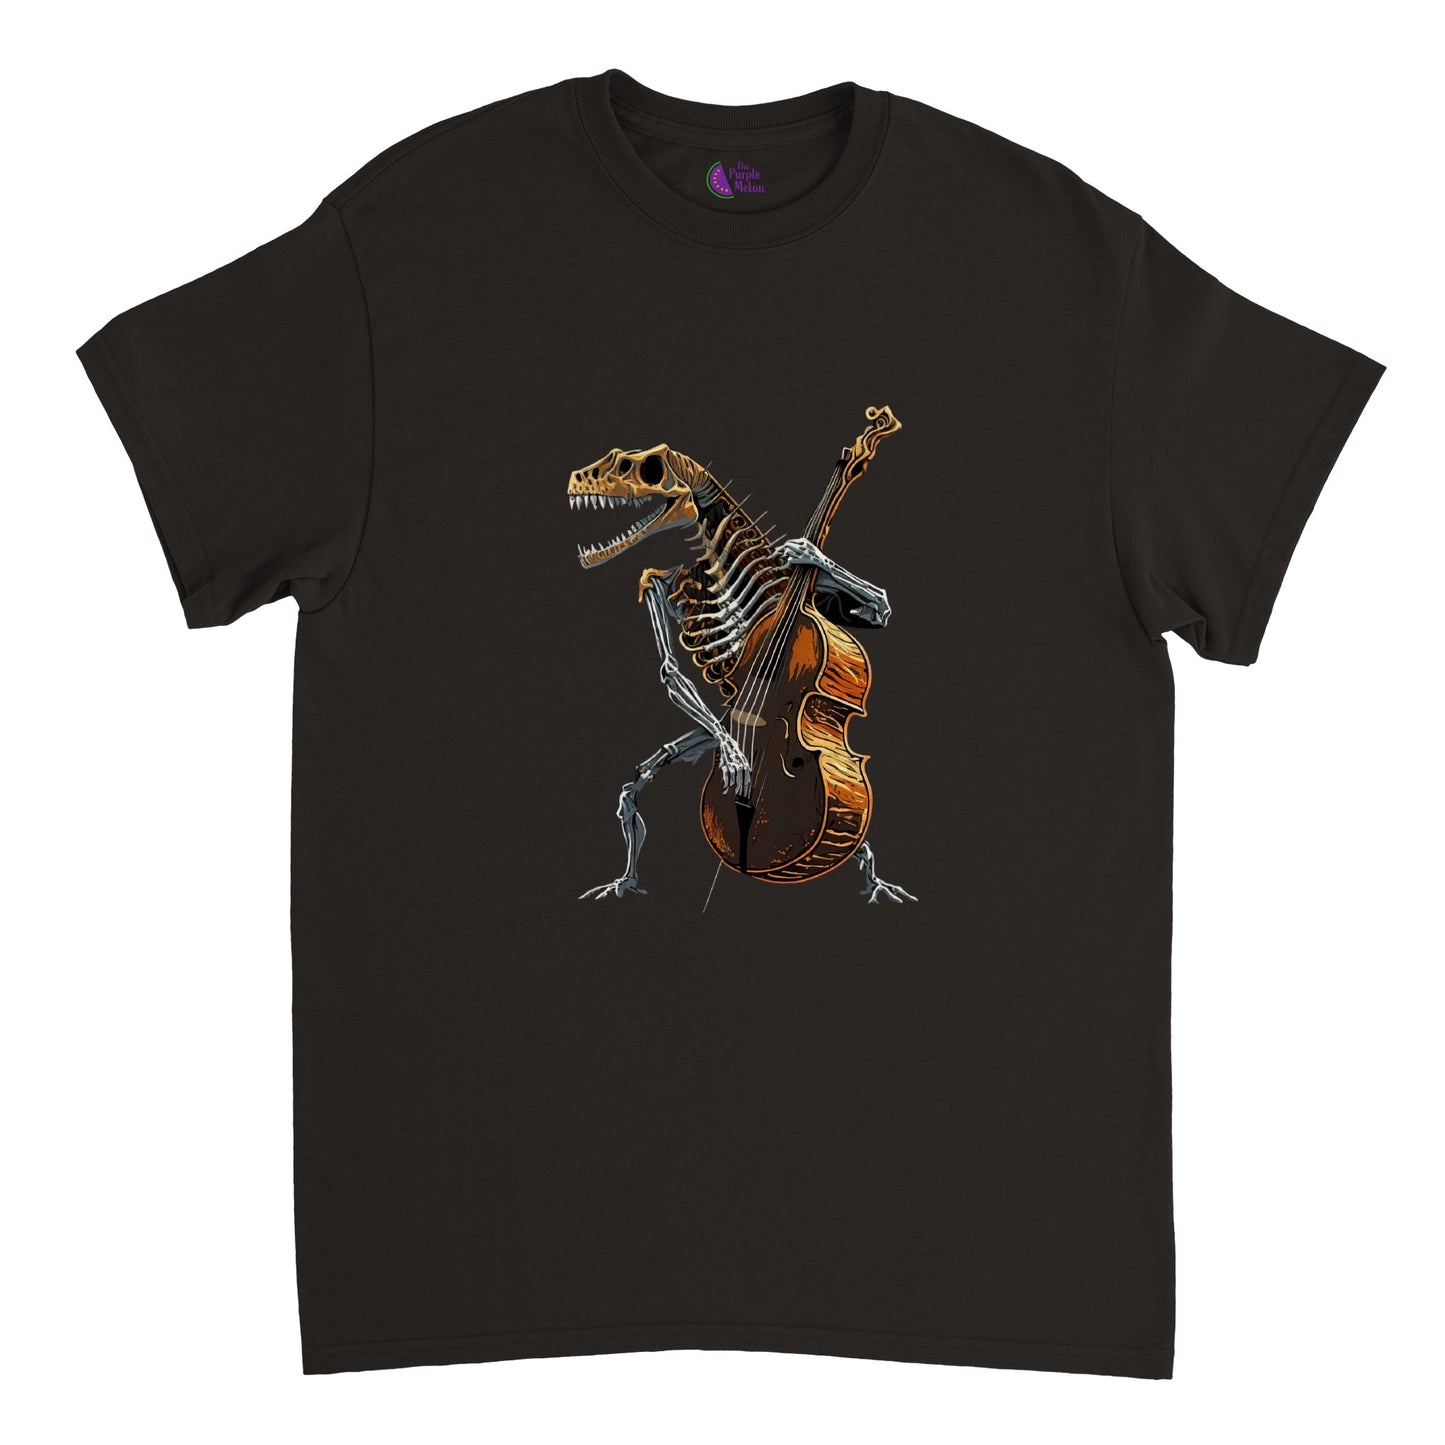 Black t-shirt with a skeleton of a t-rex playing a double bass